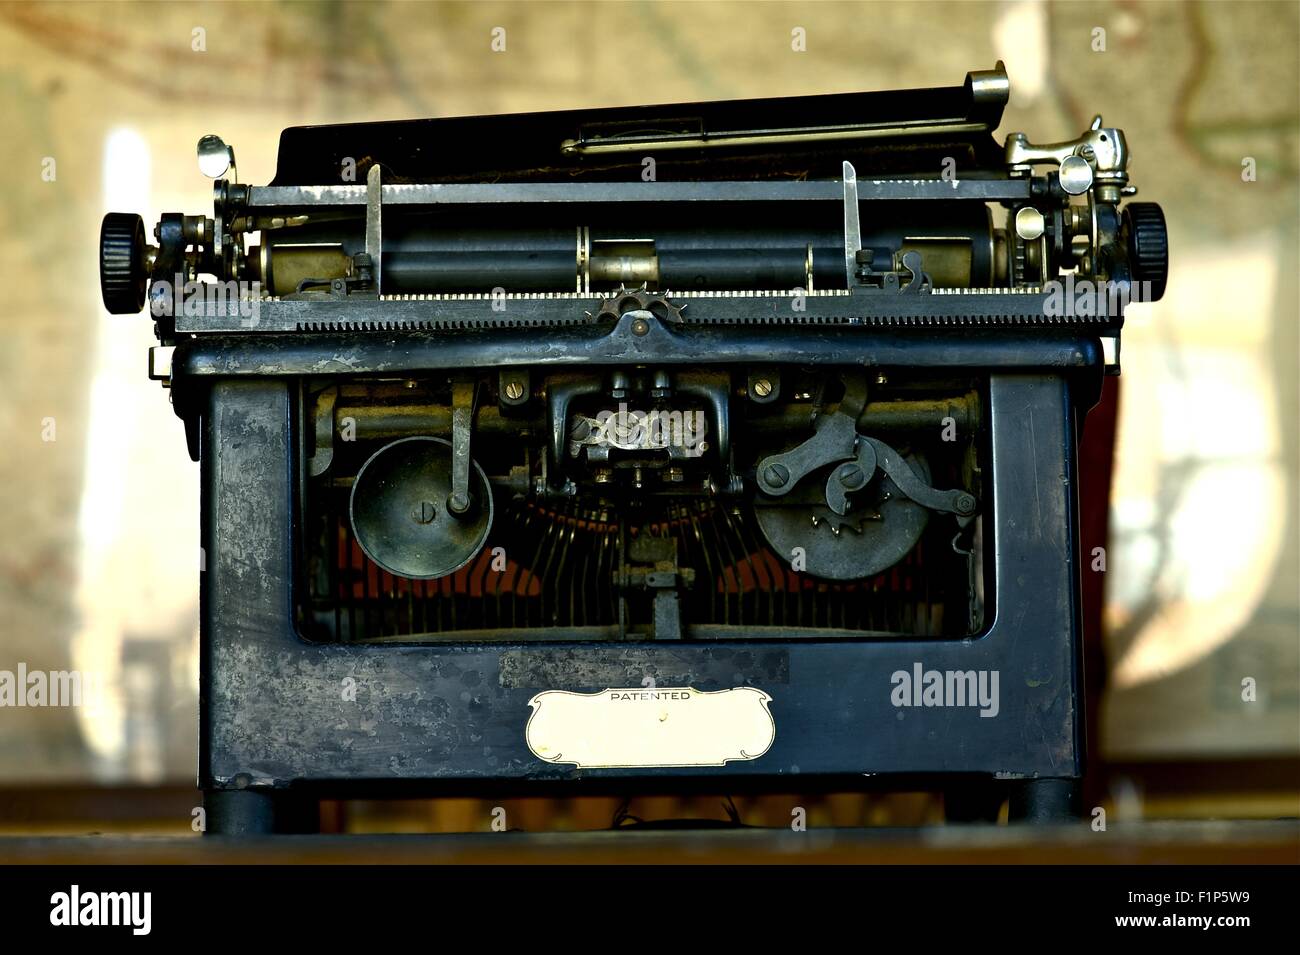 Vintage Writing Machine. Pretty Old American Typewriter. Horizontal Photo. Historical Objects Photo Collection. Stock Photo